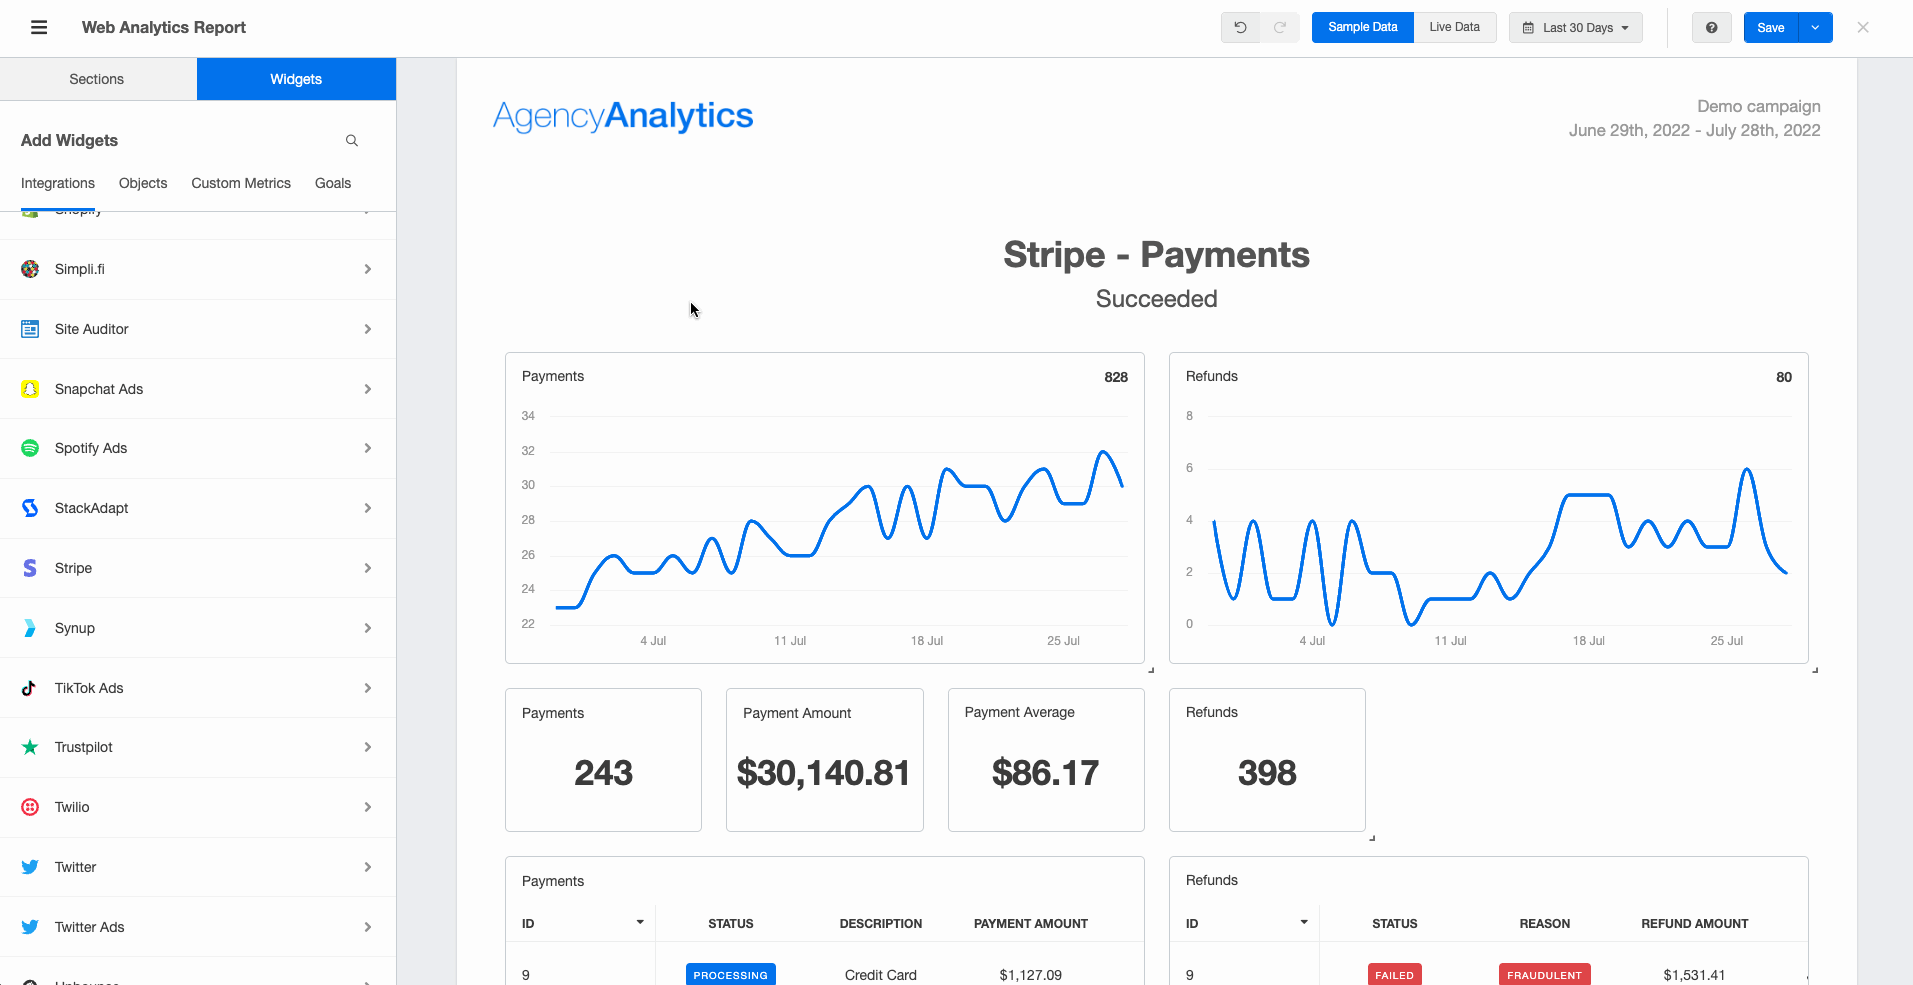 GIF of Stripe metrics being dragged and dropped into a web analytics Report template